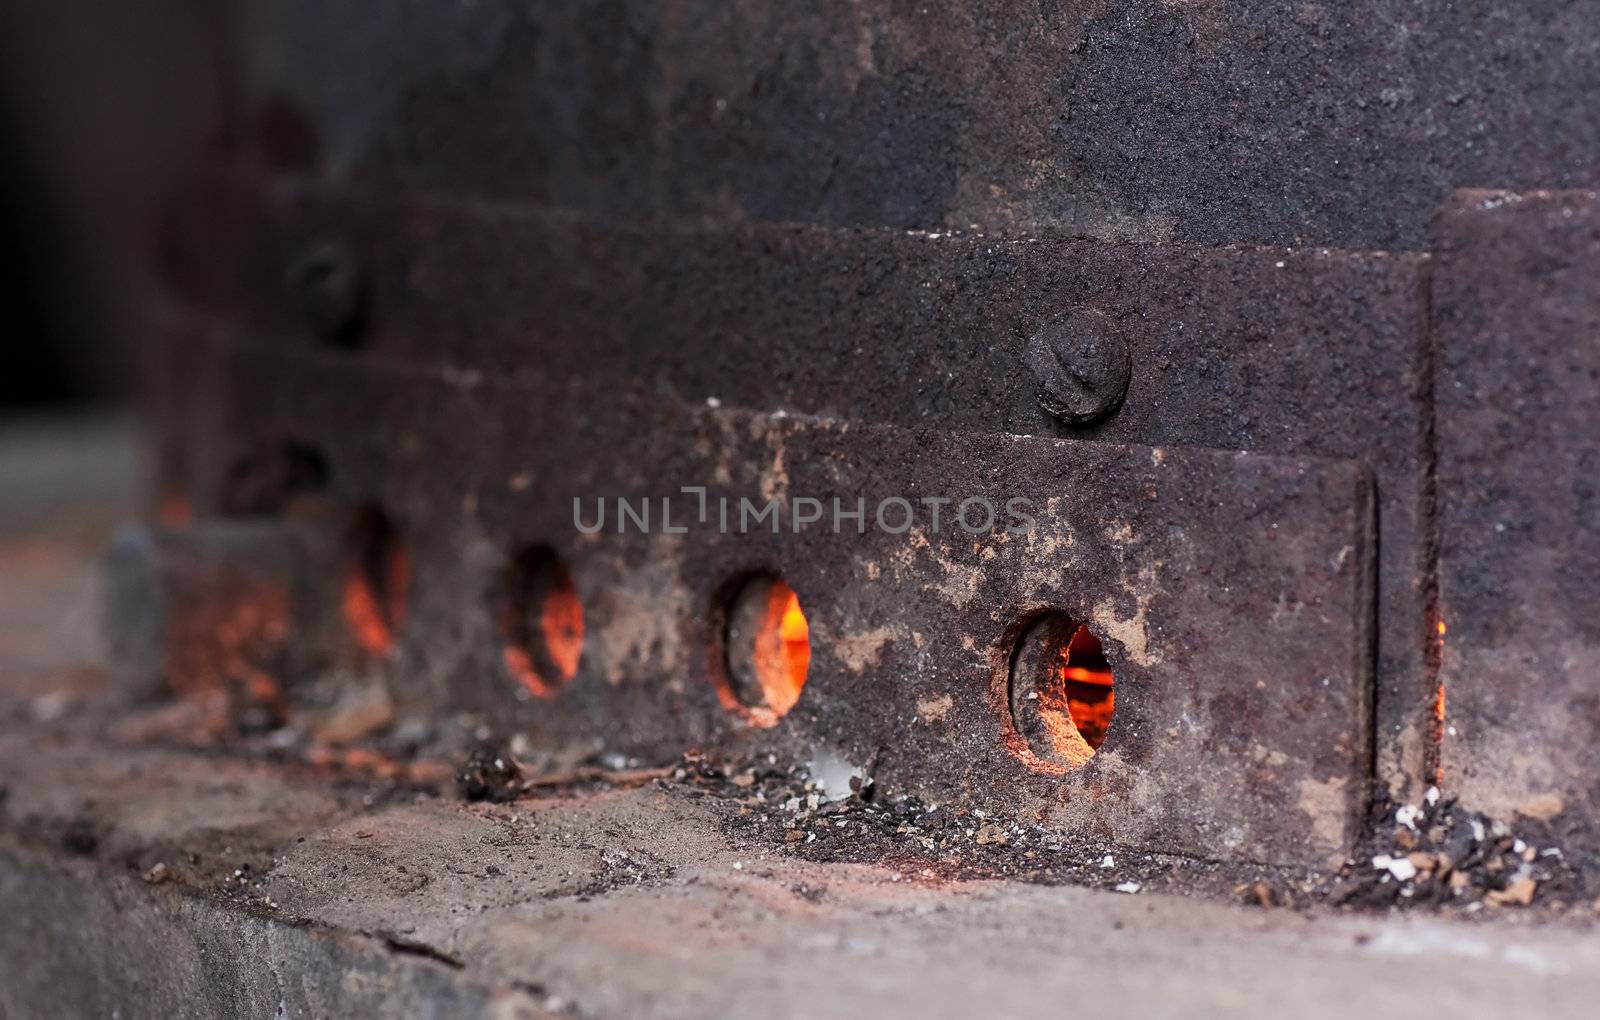 Old rusty coal furnace with hot fire inside